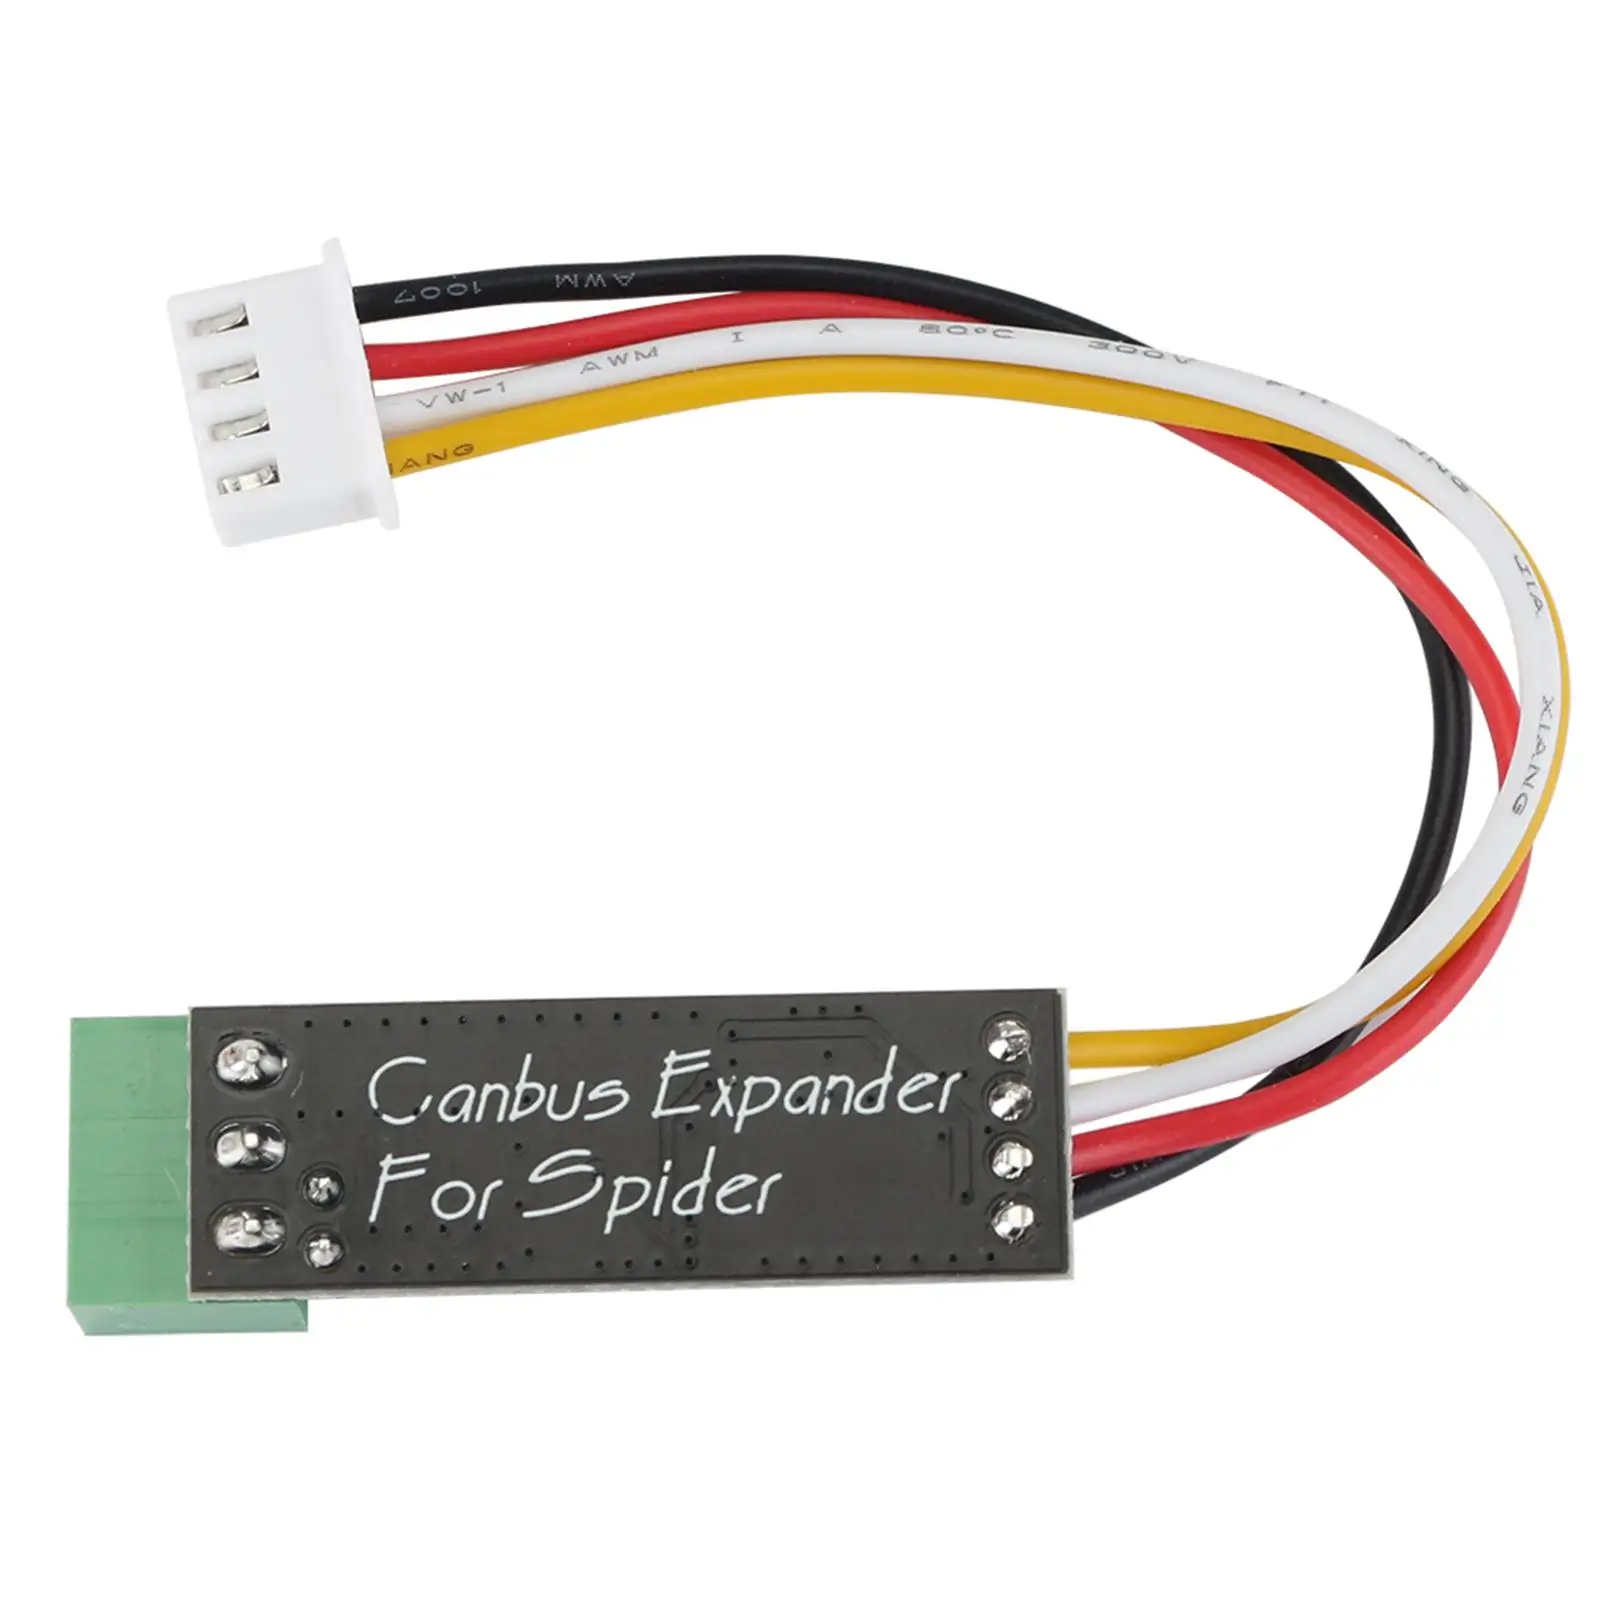 Canbus Expander Module Adapter Accessories Easy to Install for Spider Board